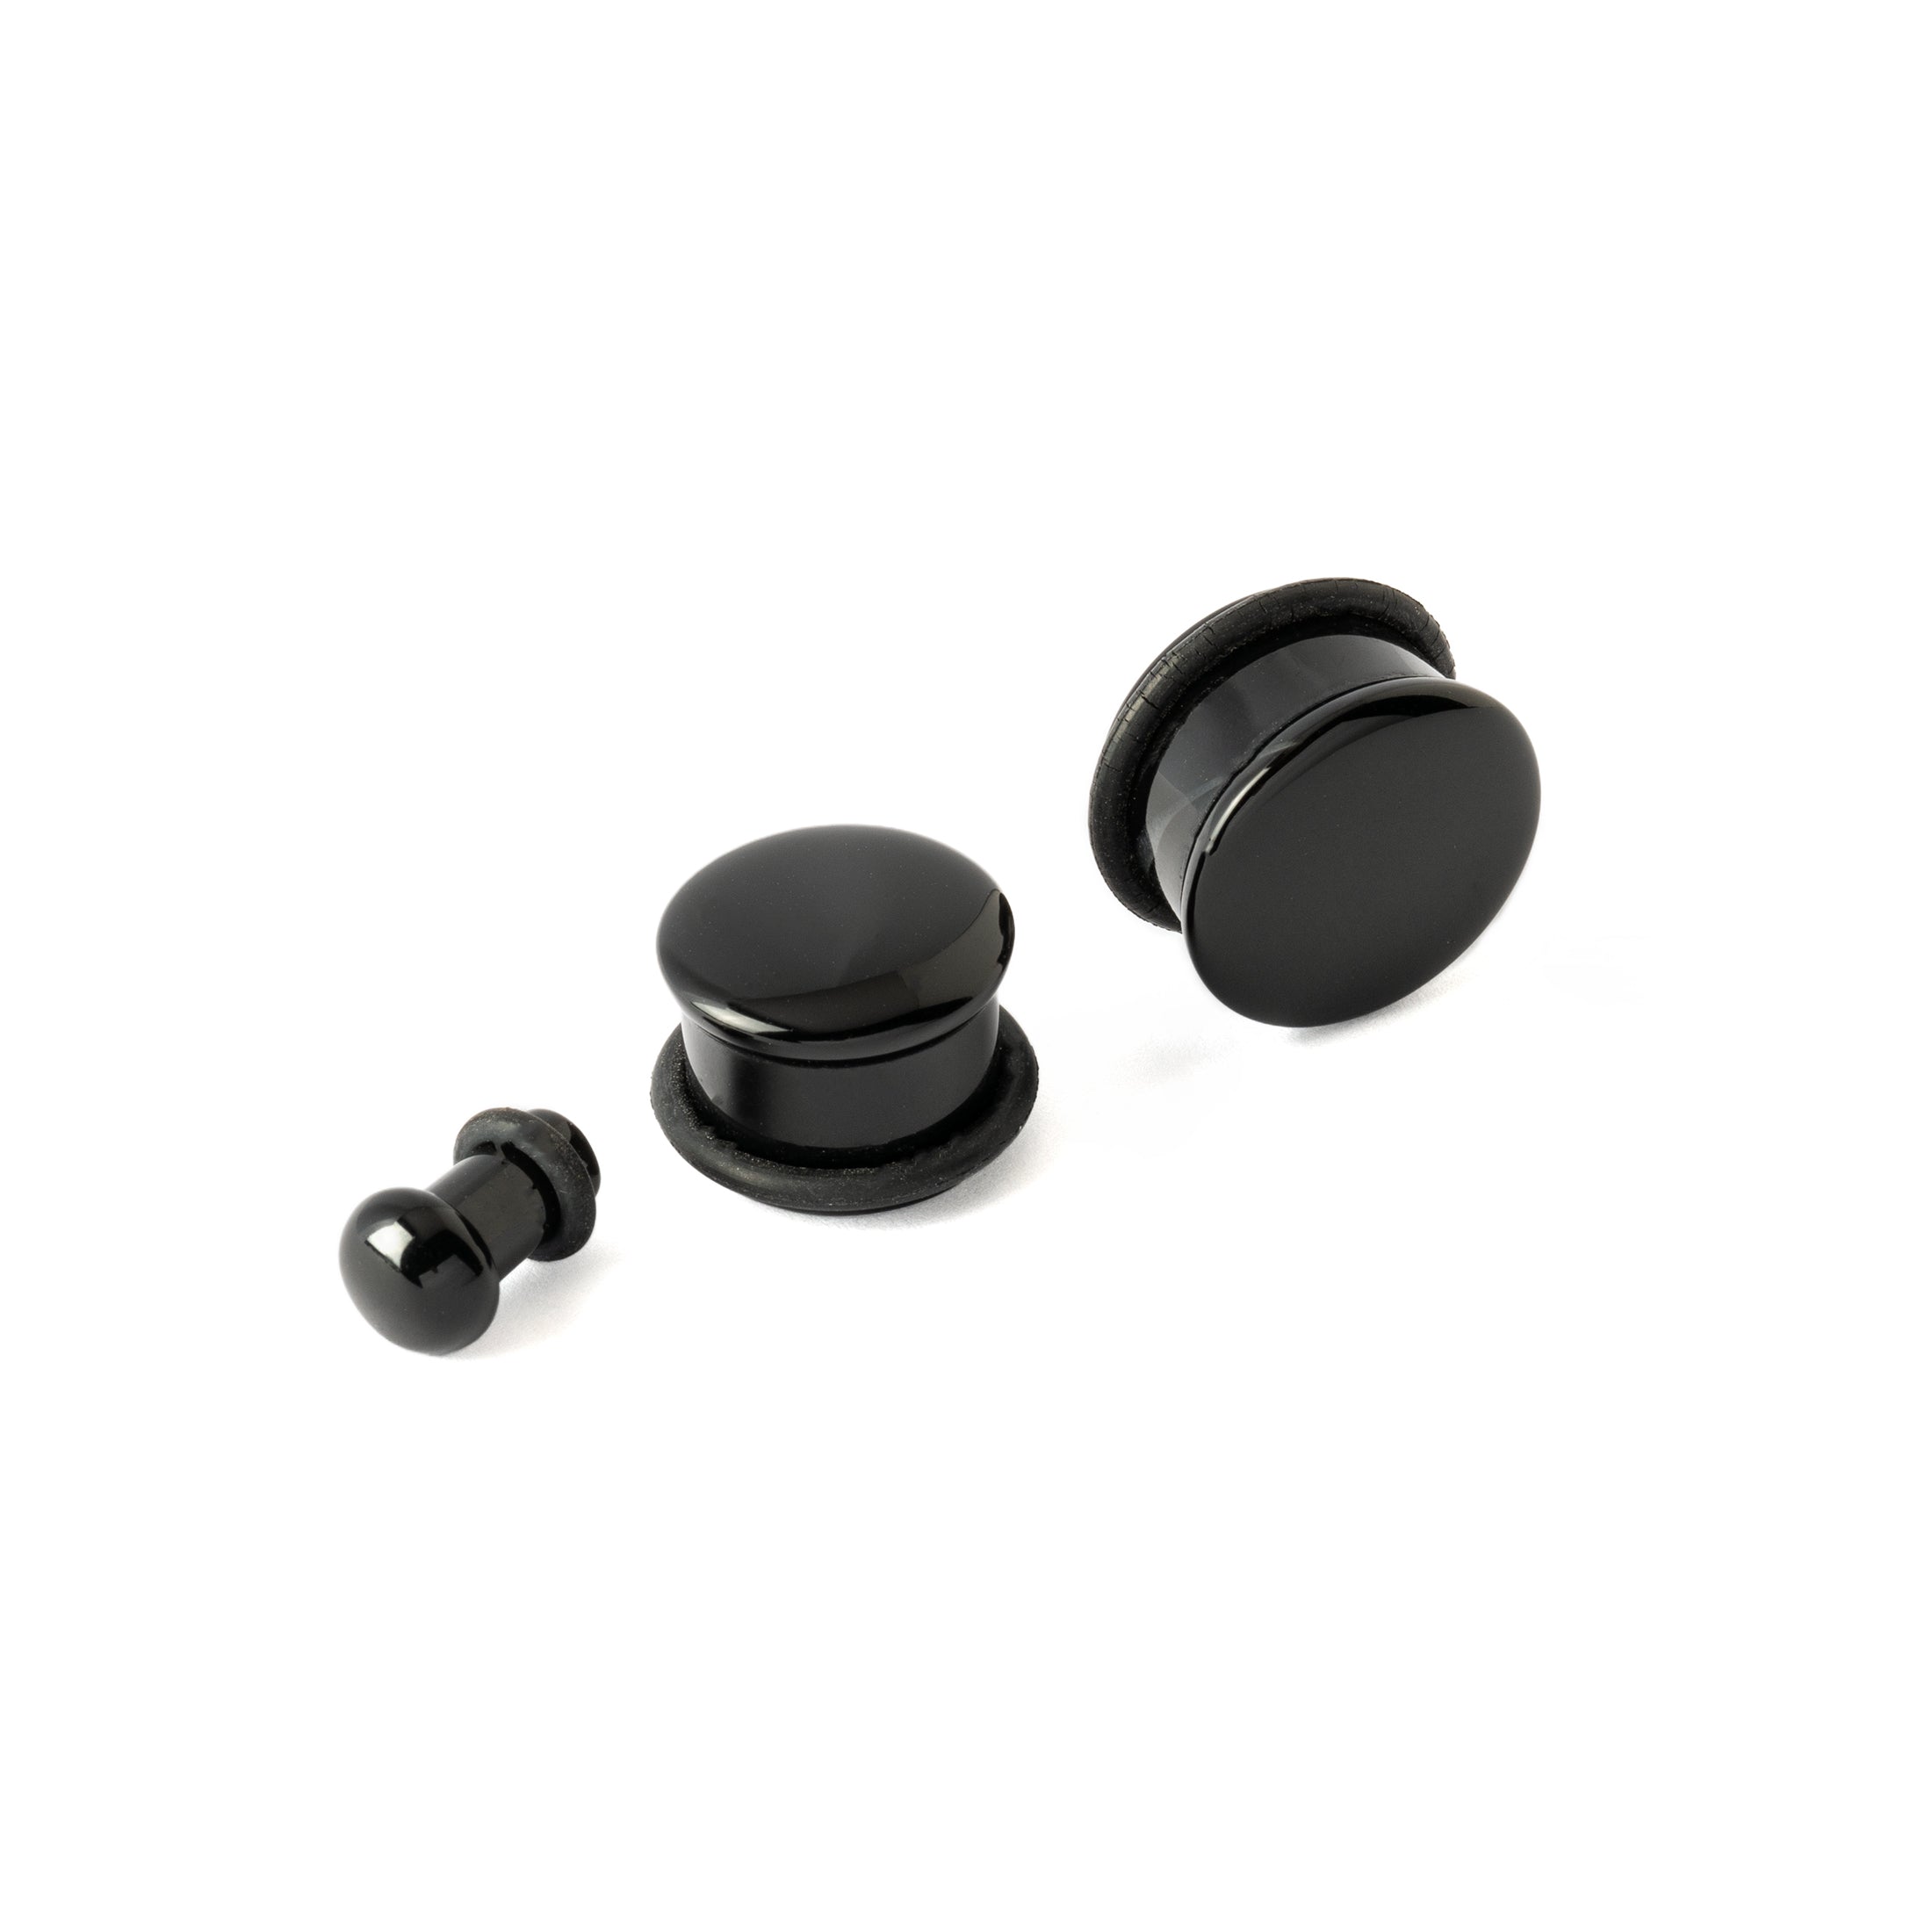 3 different sizes of Single Flare Black Agate Plugs 